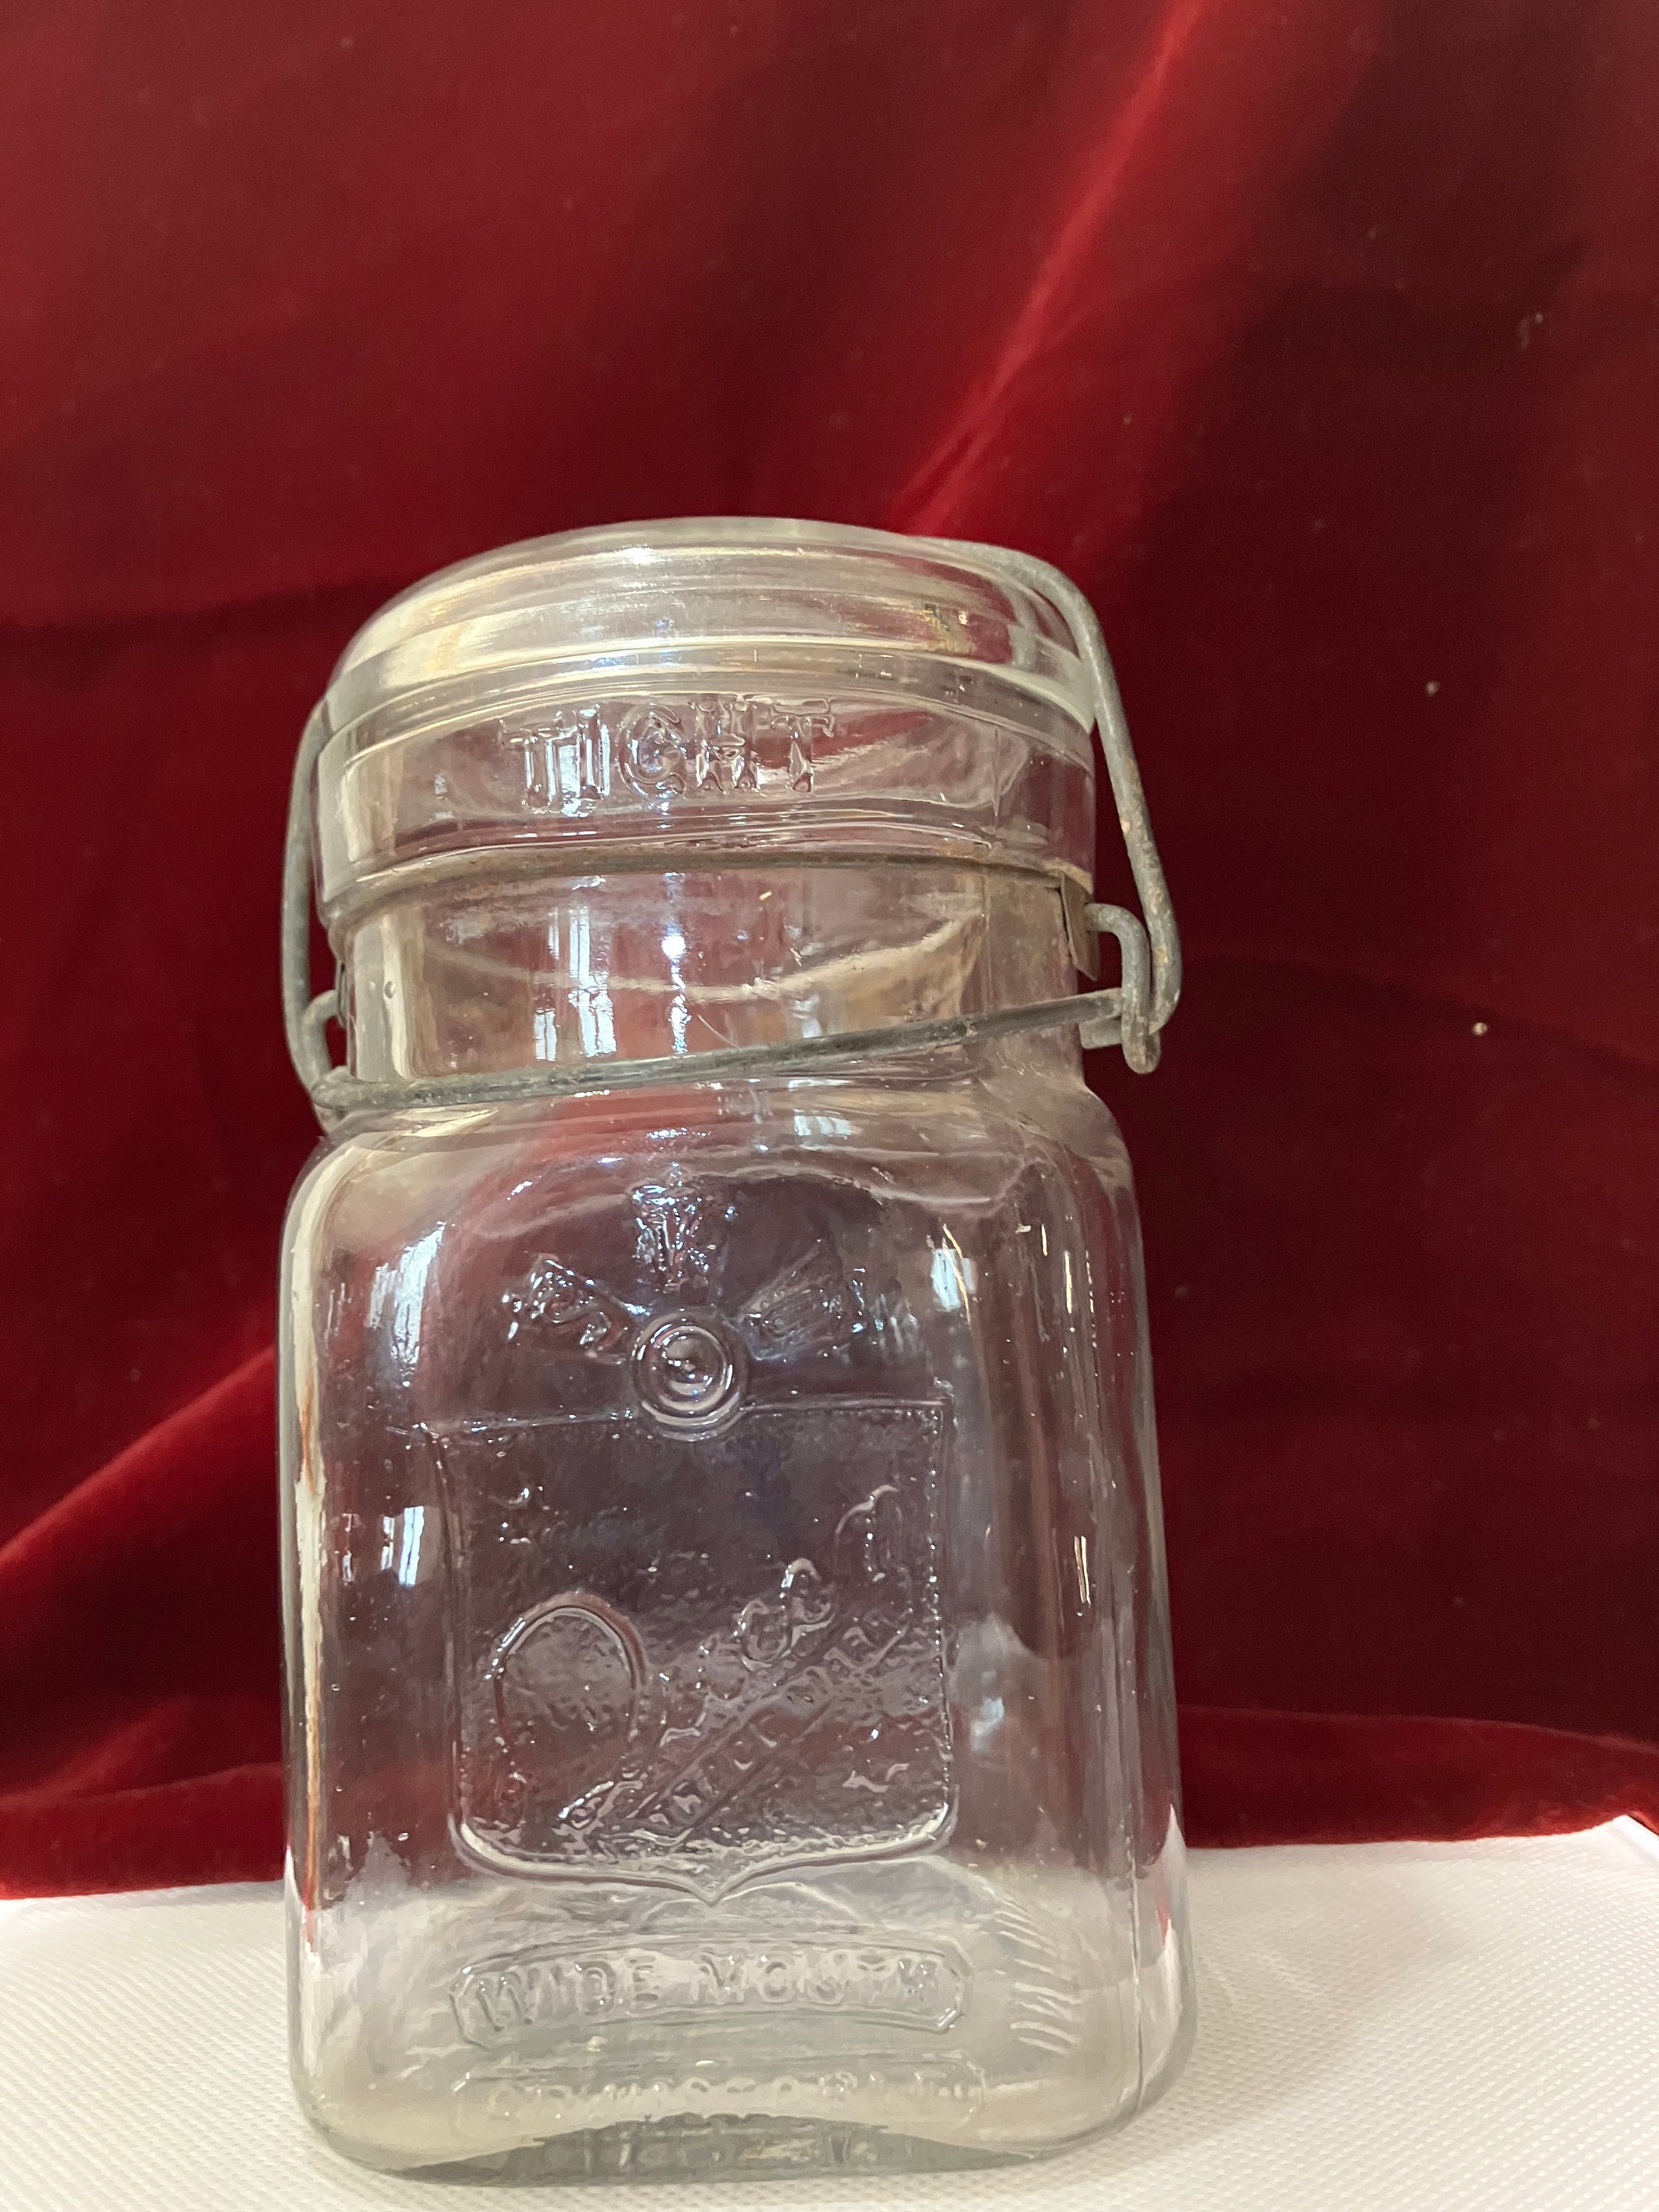 Small Glass Jar With Wire Snap Lid Favor Container (12)